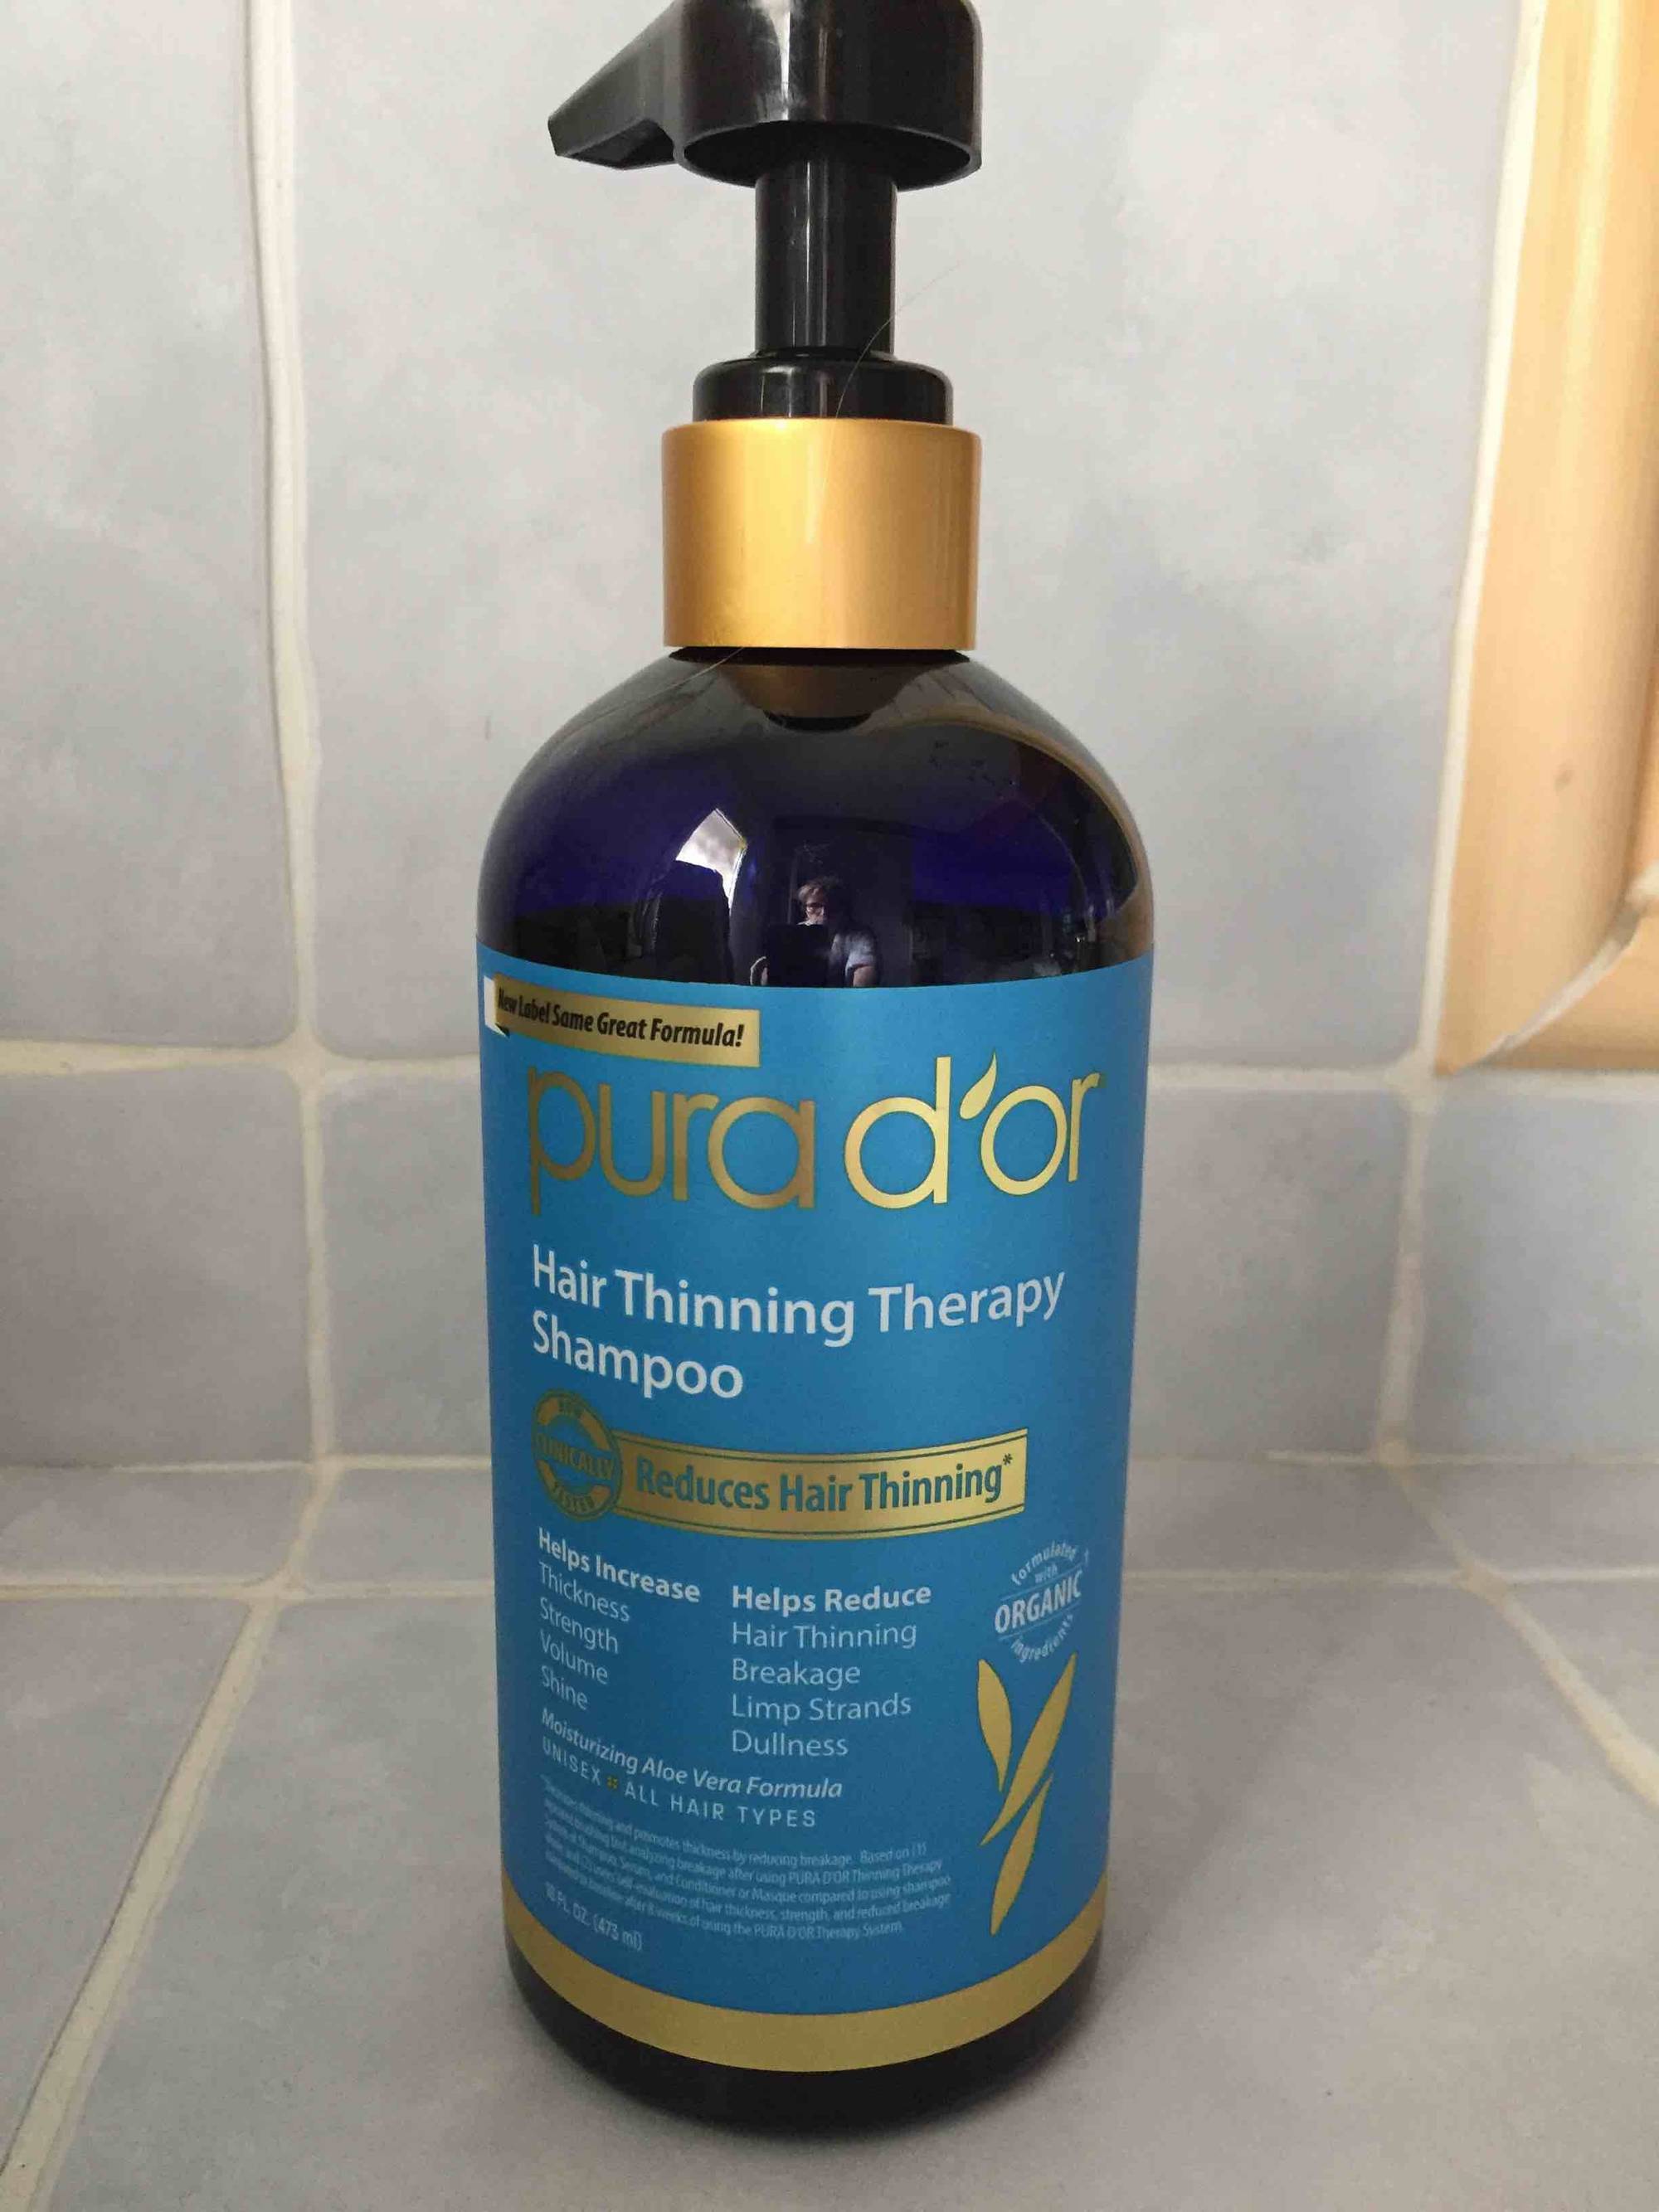 PURA D'OR - Hair thinning therapy - Shampoo